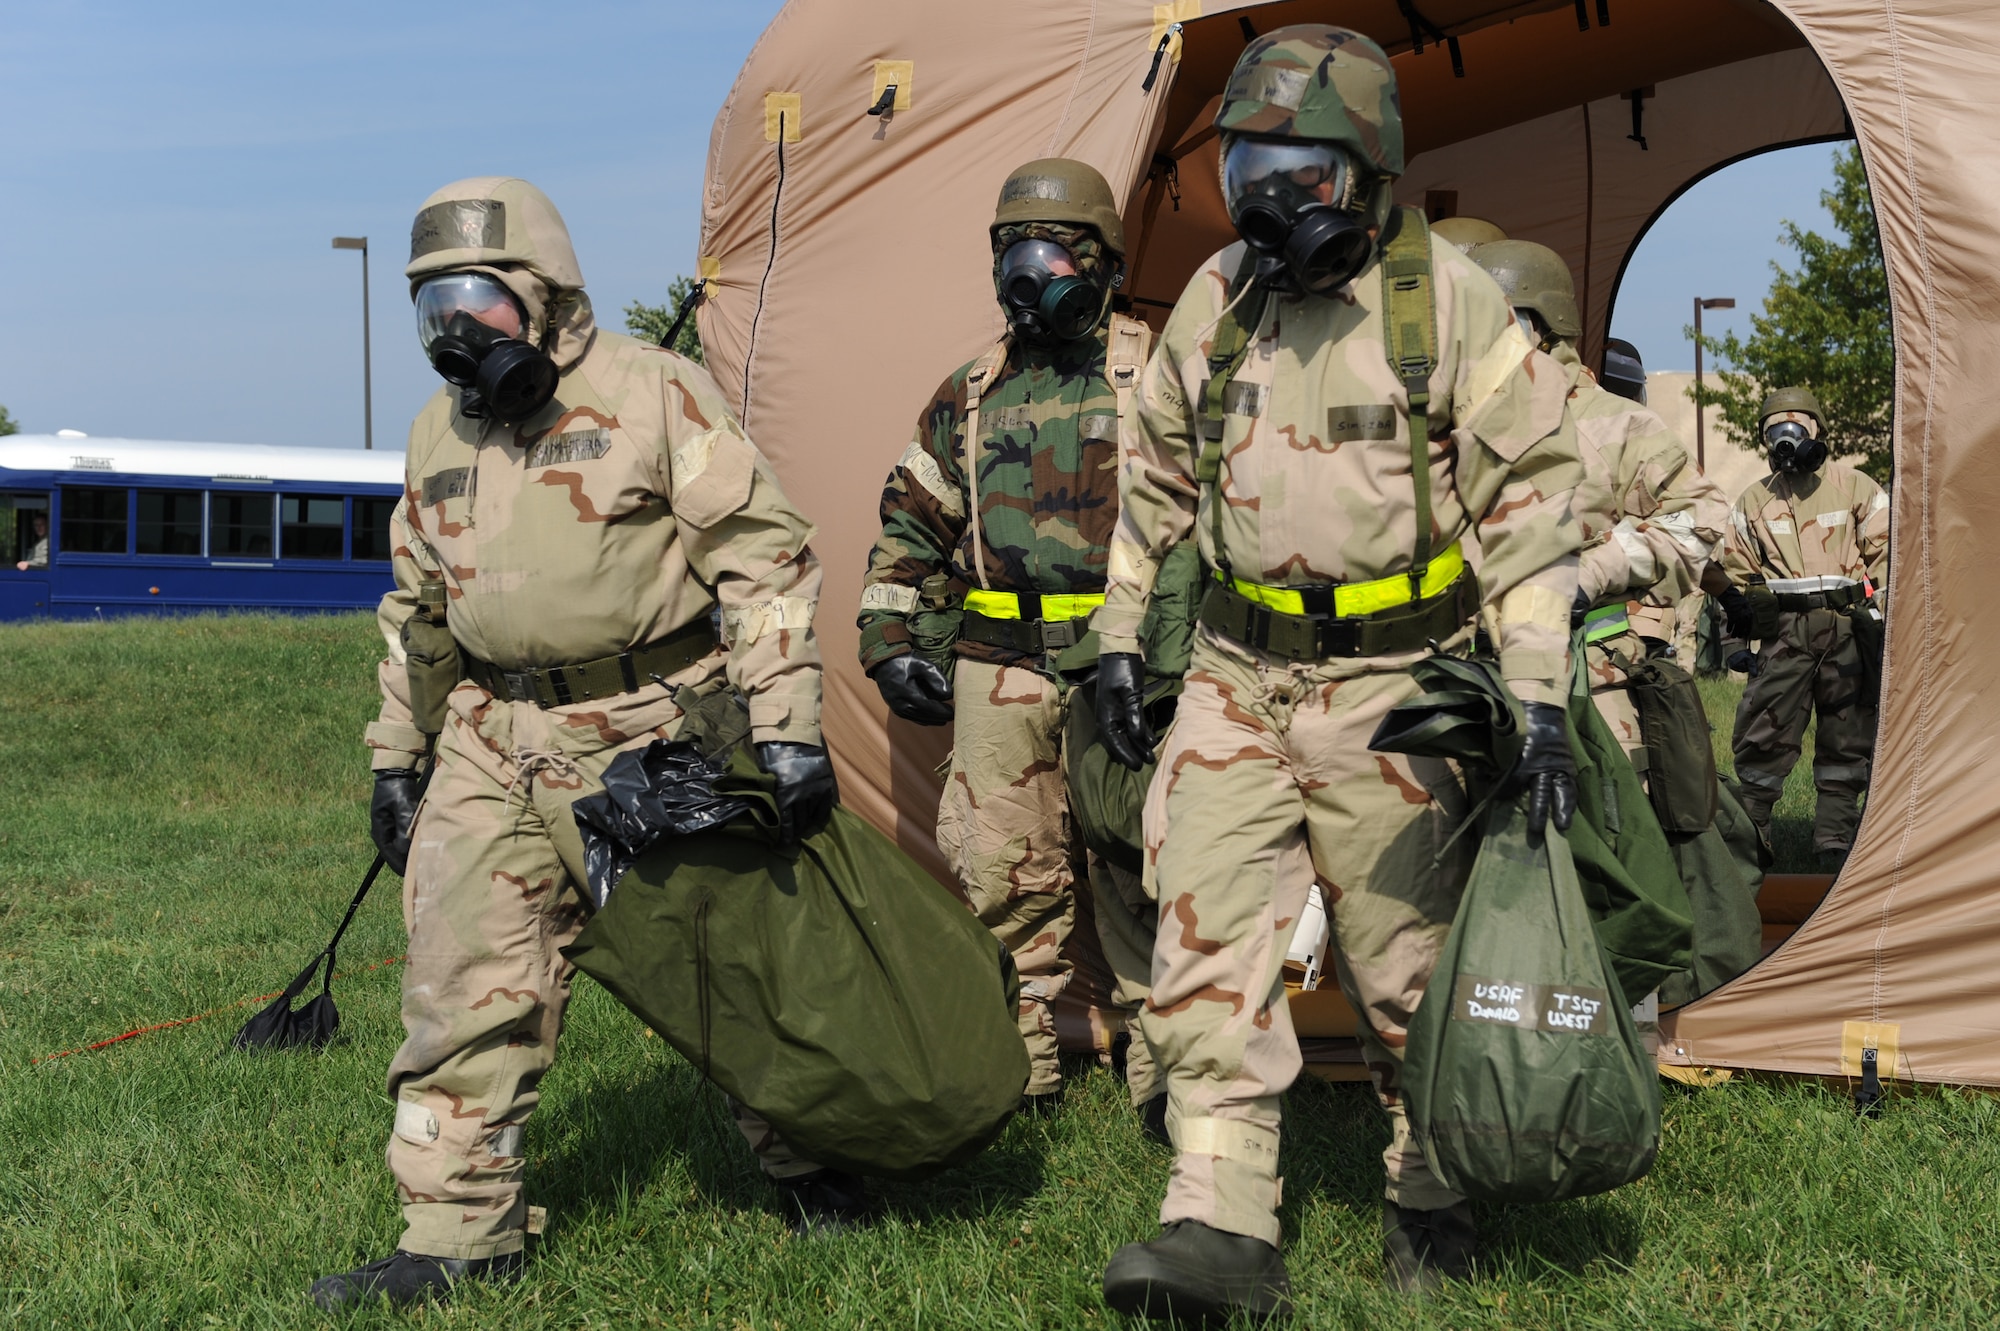 WHITEMAN AIR FORCE BASE, Mo. – Members of the 442nd Fighter Wing proceeds to the next station while processing through a chemical line during an exercise, Sept. 16. The 442nd Fighter Wing has exercise to ensure their members remain current on their readiness training. (U.S. Air Force Photo/ SrA Cory Todd)